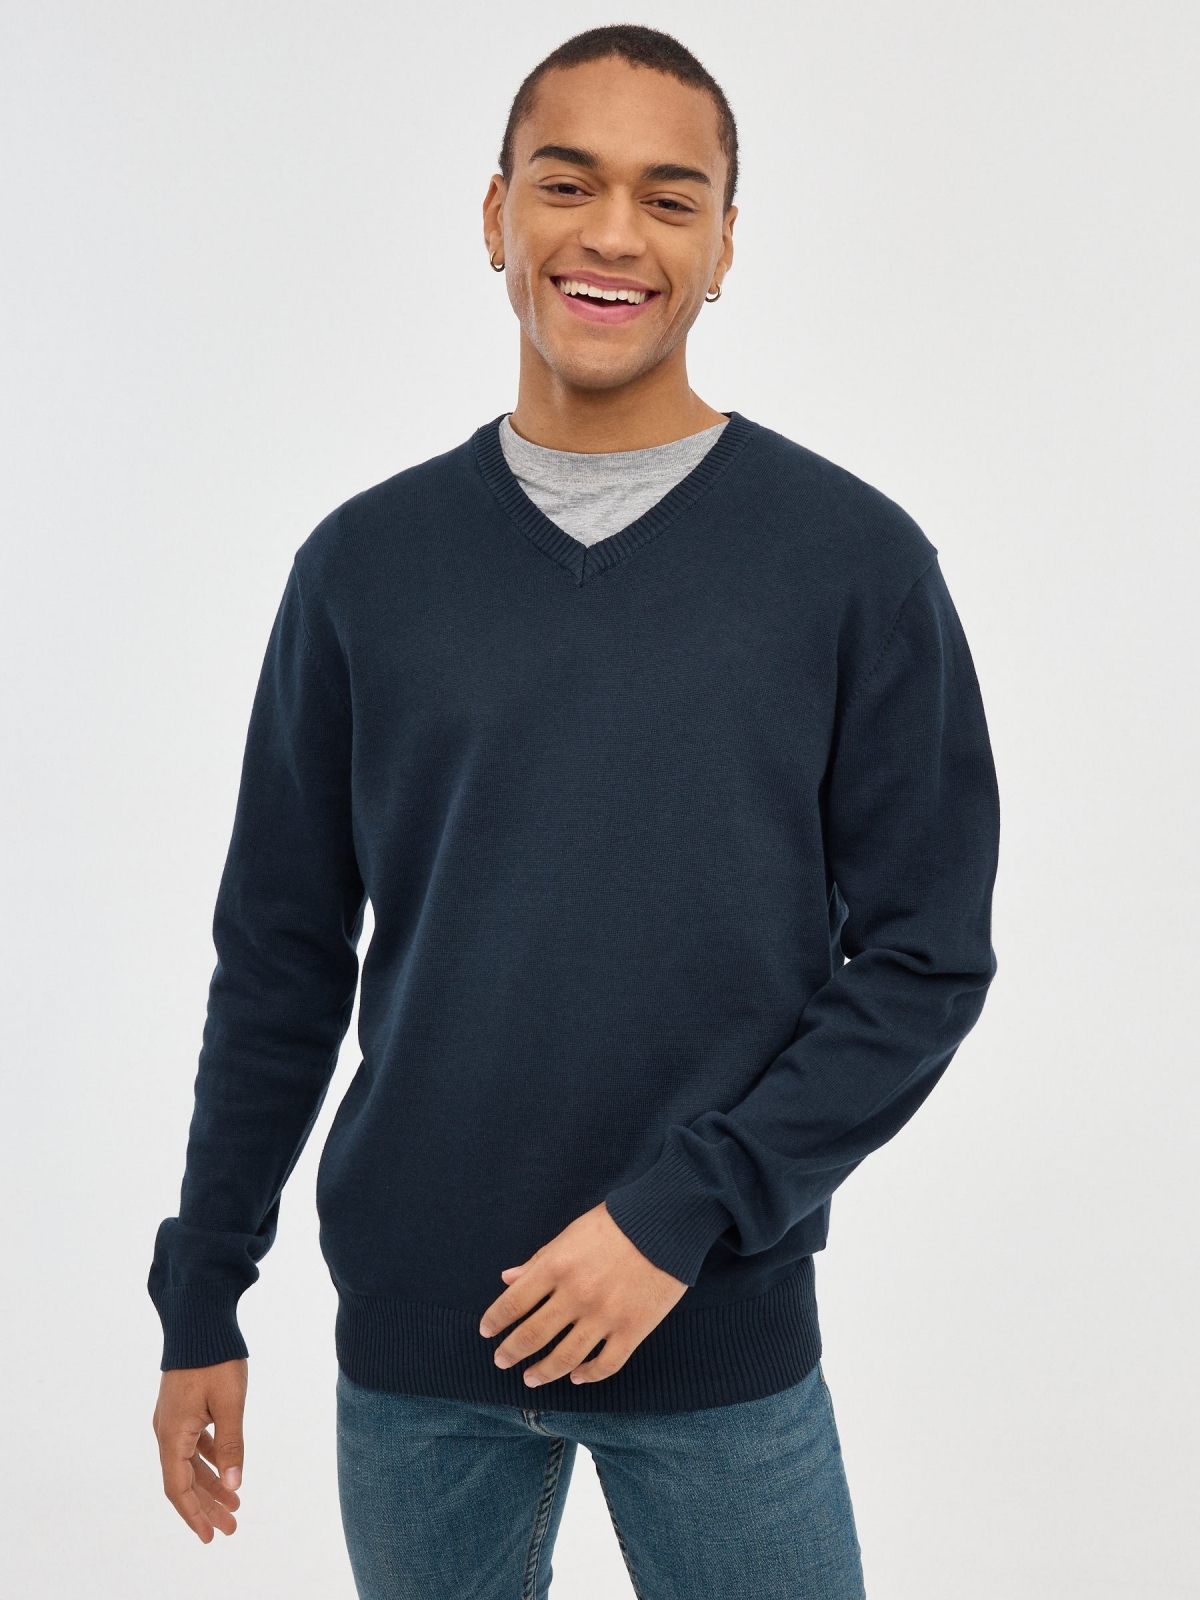 Basic Navy Blue Sweater navy middle front view